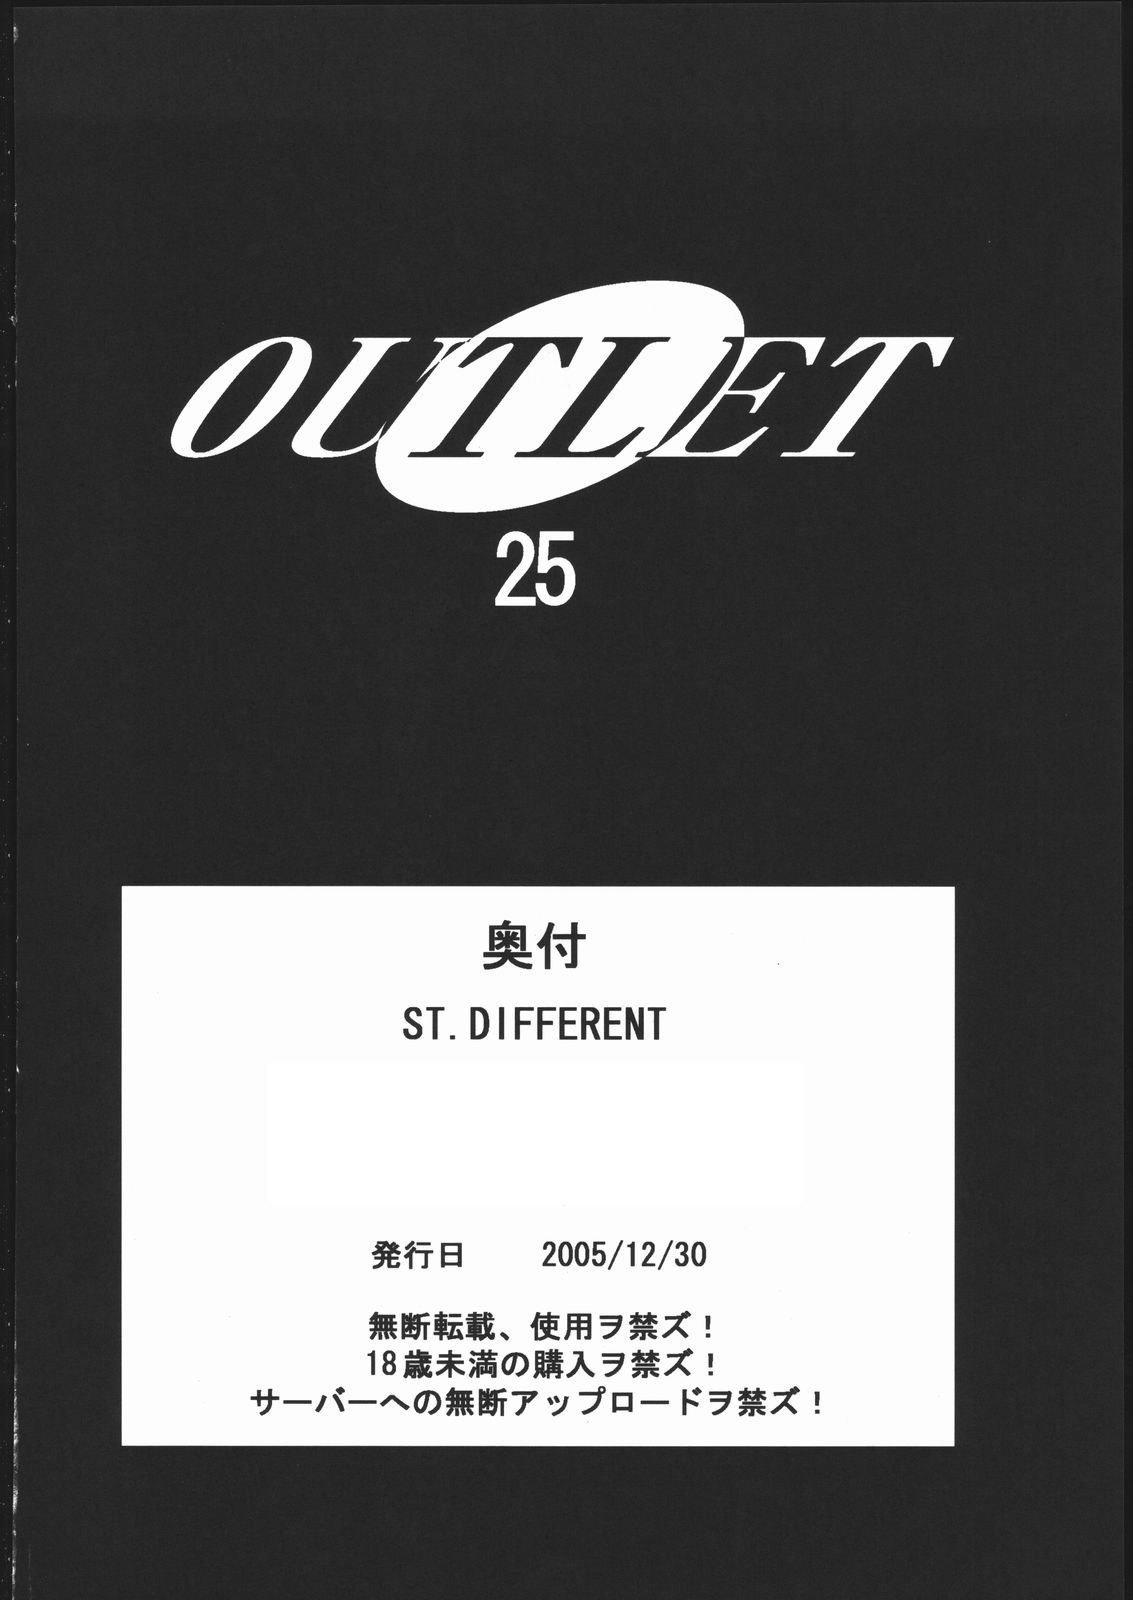 (C69) [ST.DIFFERENT (よろず)] OUTLET 25 (舞-乙HiME)